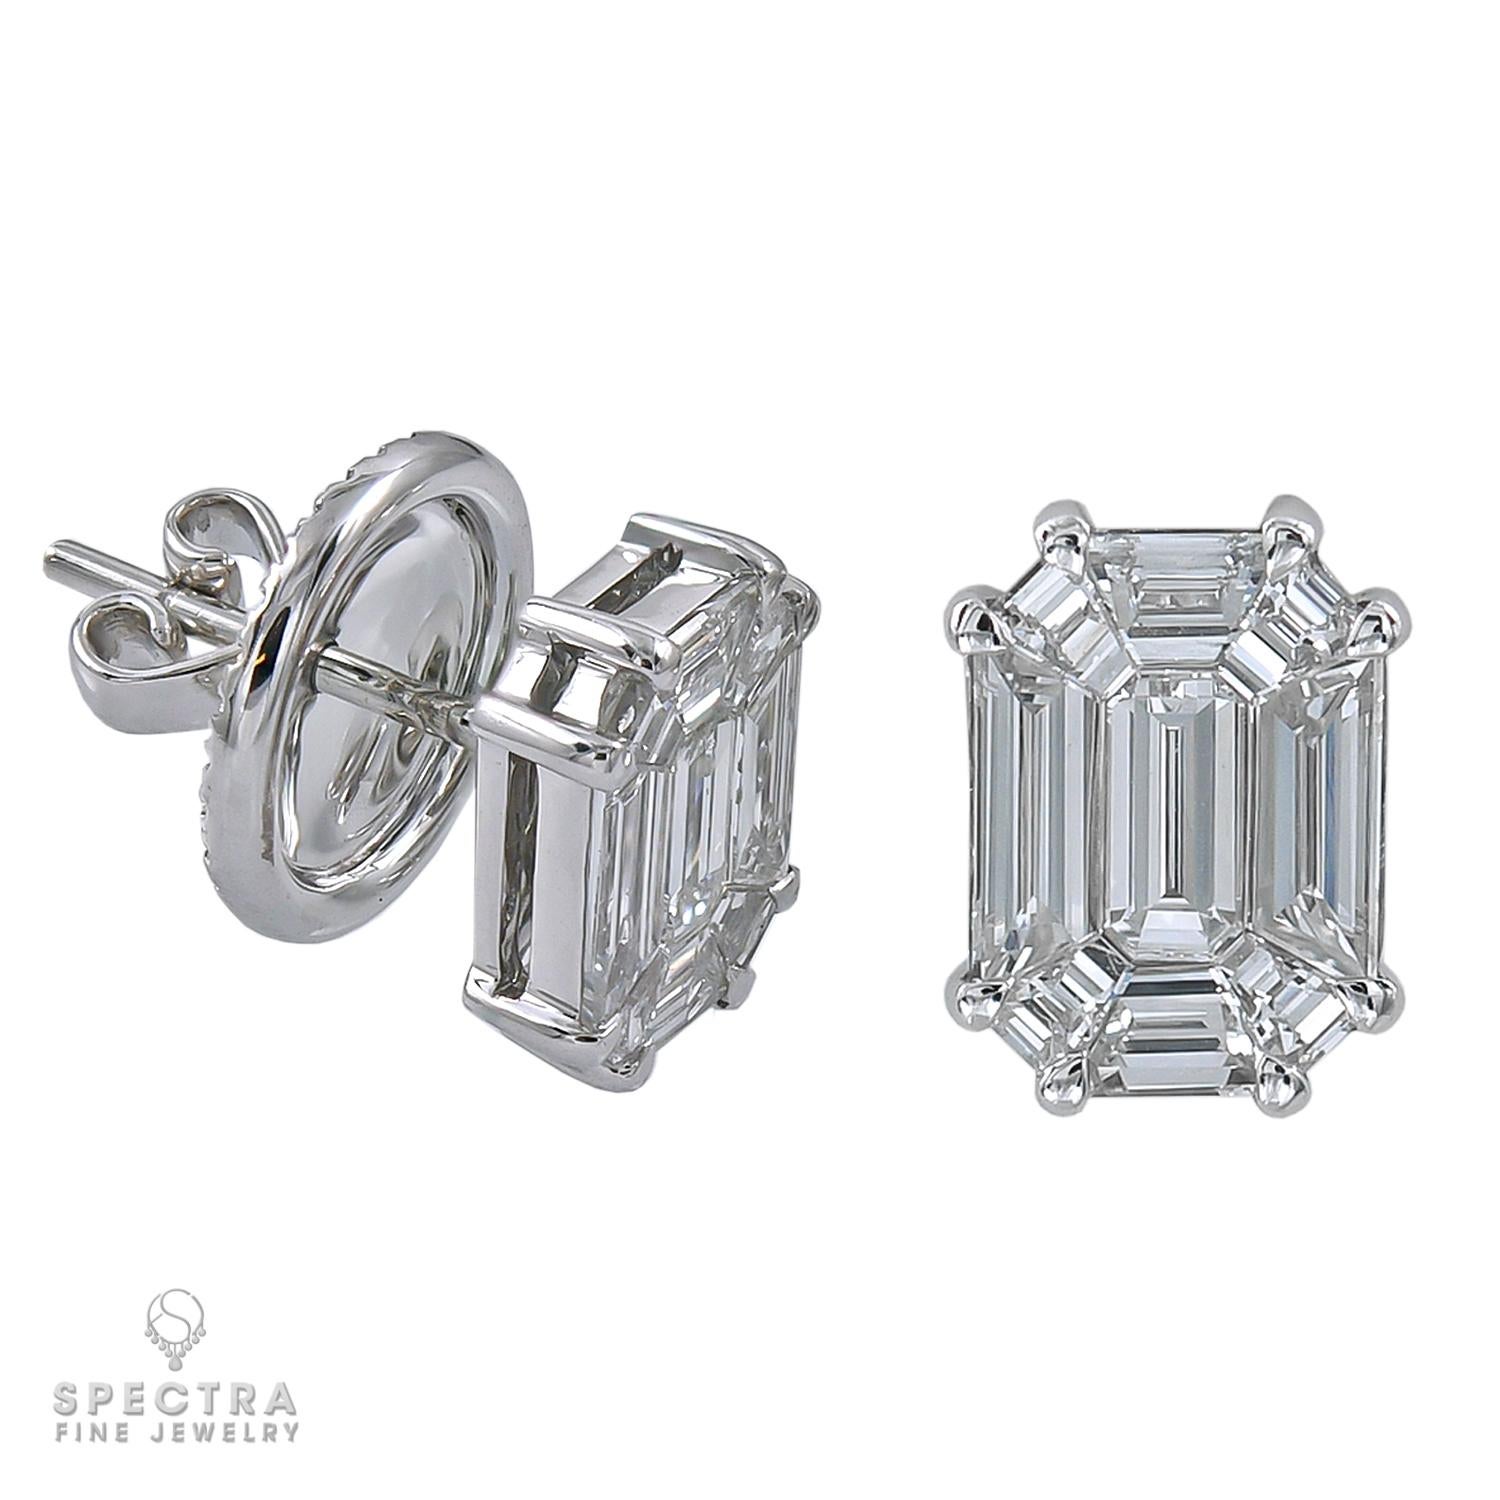 Beautiful stud earrings decorated with invisibly set diamonds. 
One earring is comprising of 9 pie-cut diamonds weighing a total of 1.08 carats.
The other earring is set with 9 pie-cut diamonds weighing a total of 1.09 carats.
Each earring has a